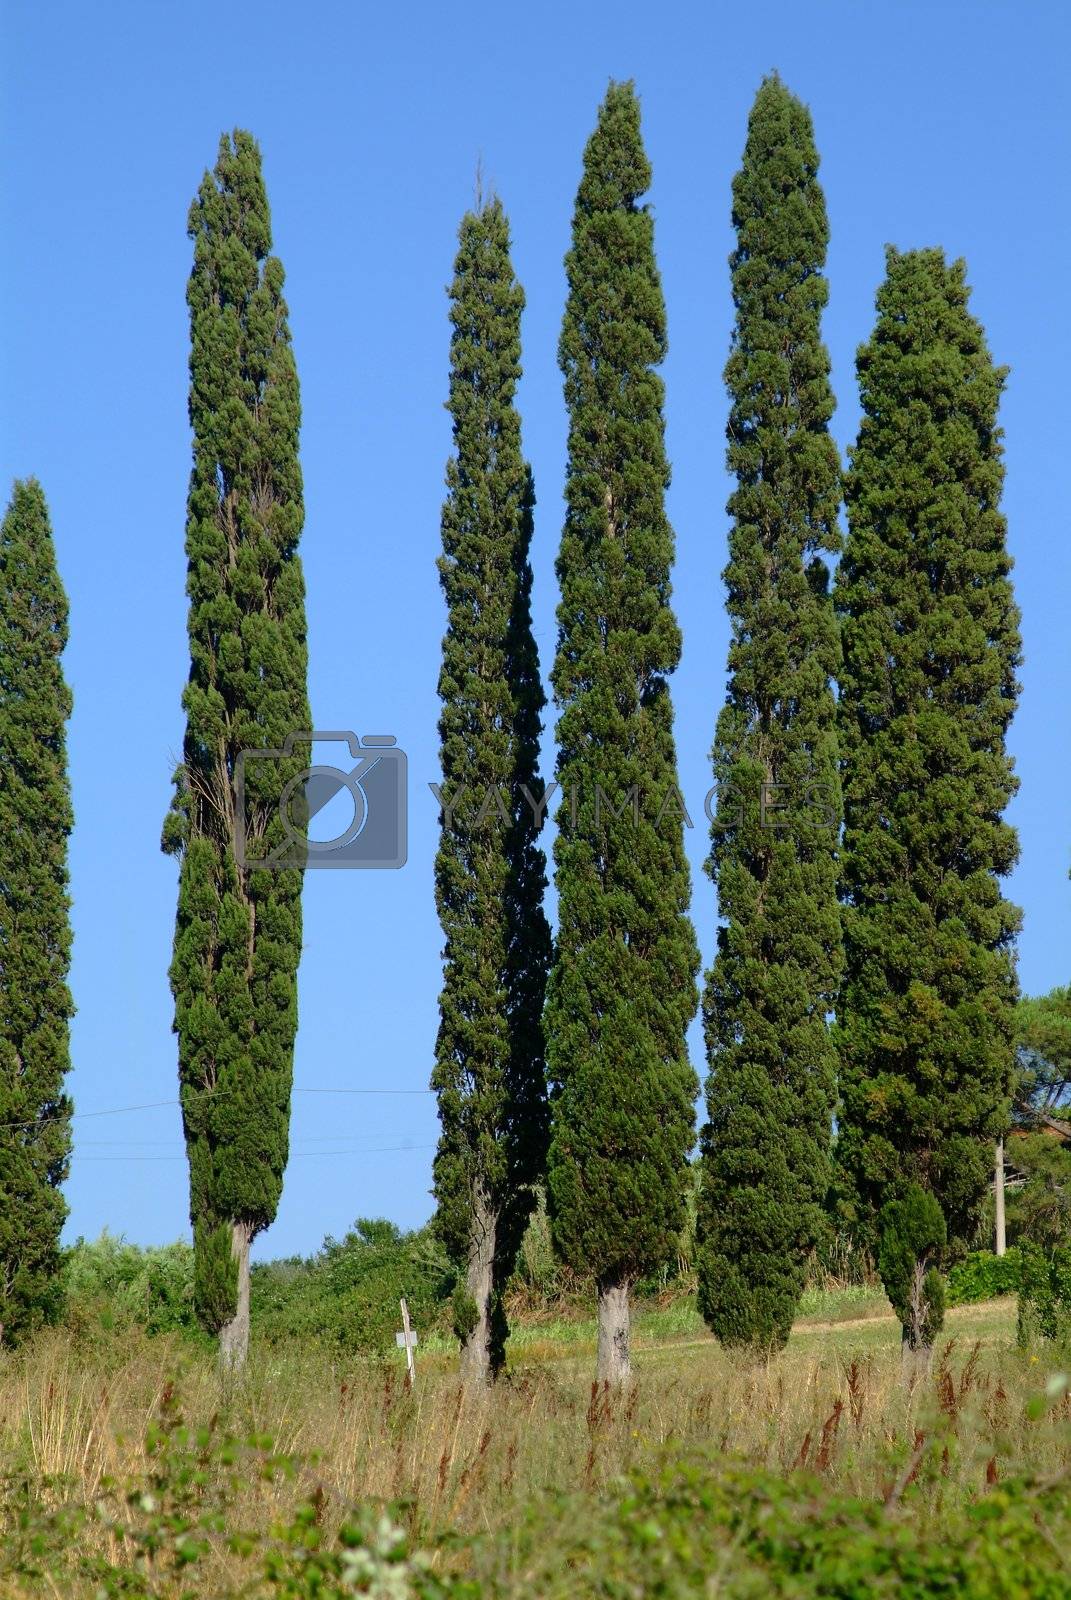 Royalty free image of zypresse 6 | 6 cypresses  by fotofritz